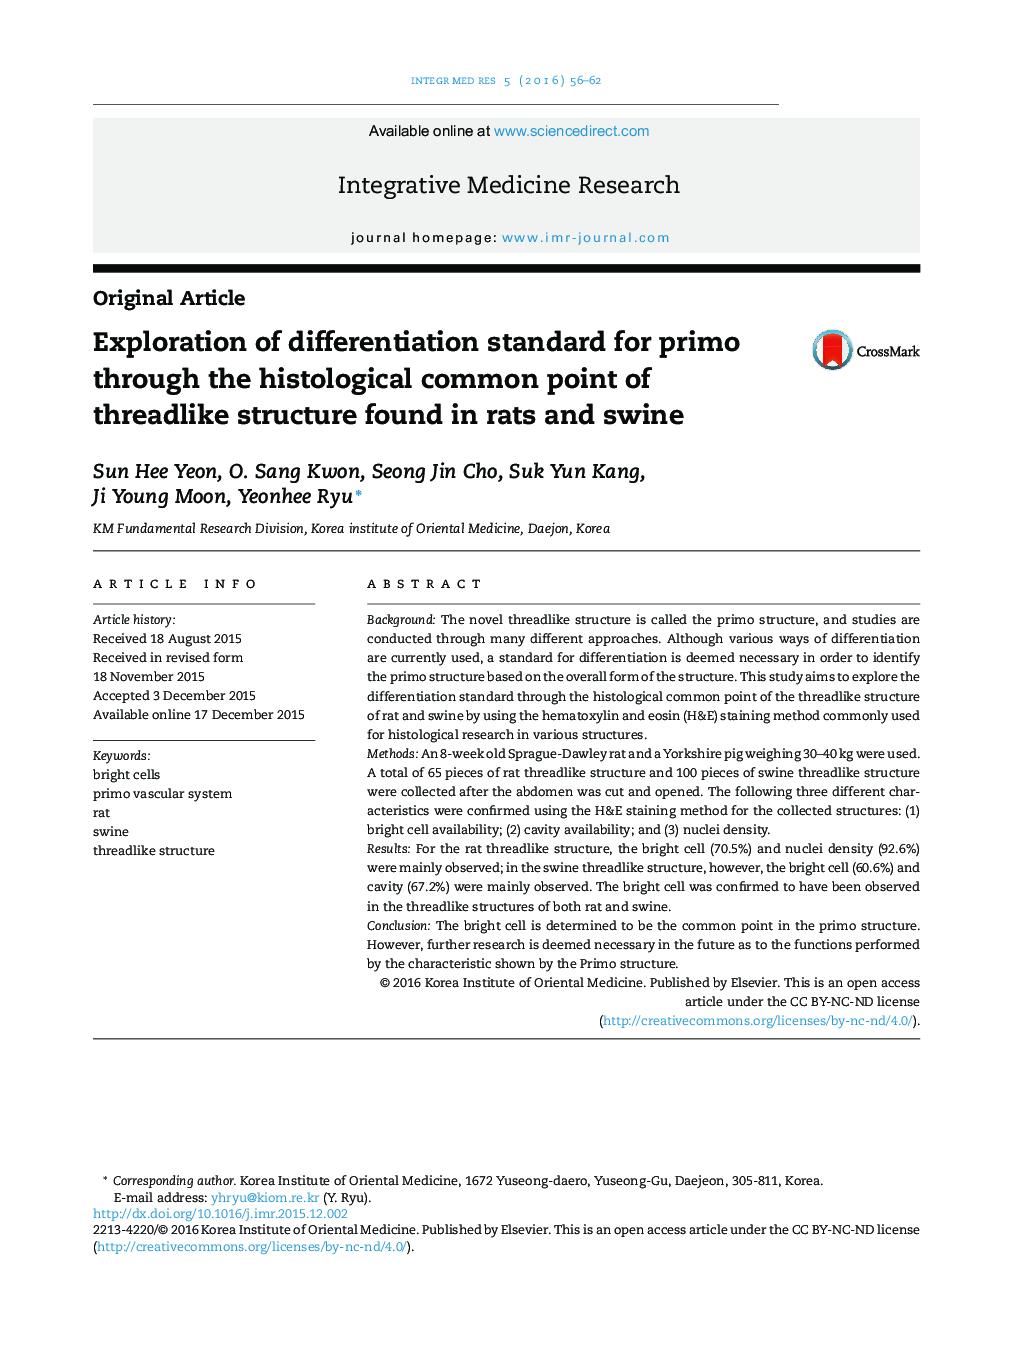 Exploration of differentiation standard for primo through the histological common point of threadlike structure found in rats and swine